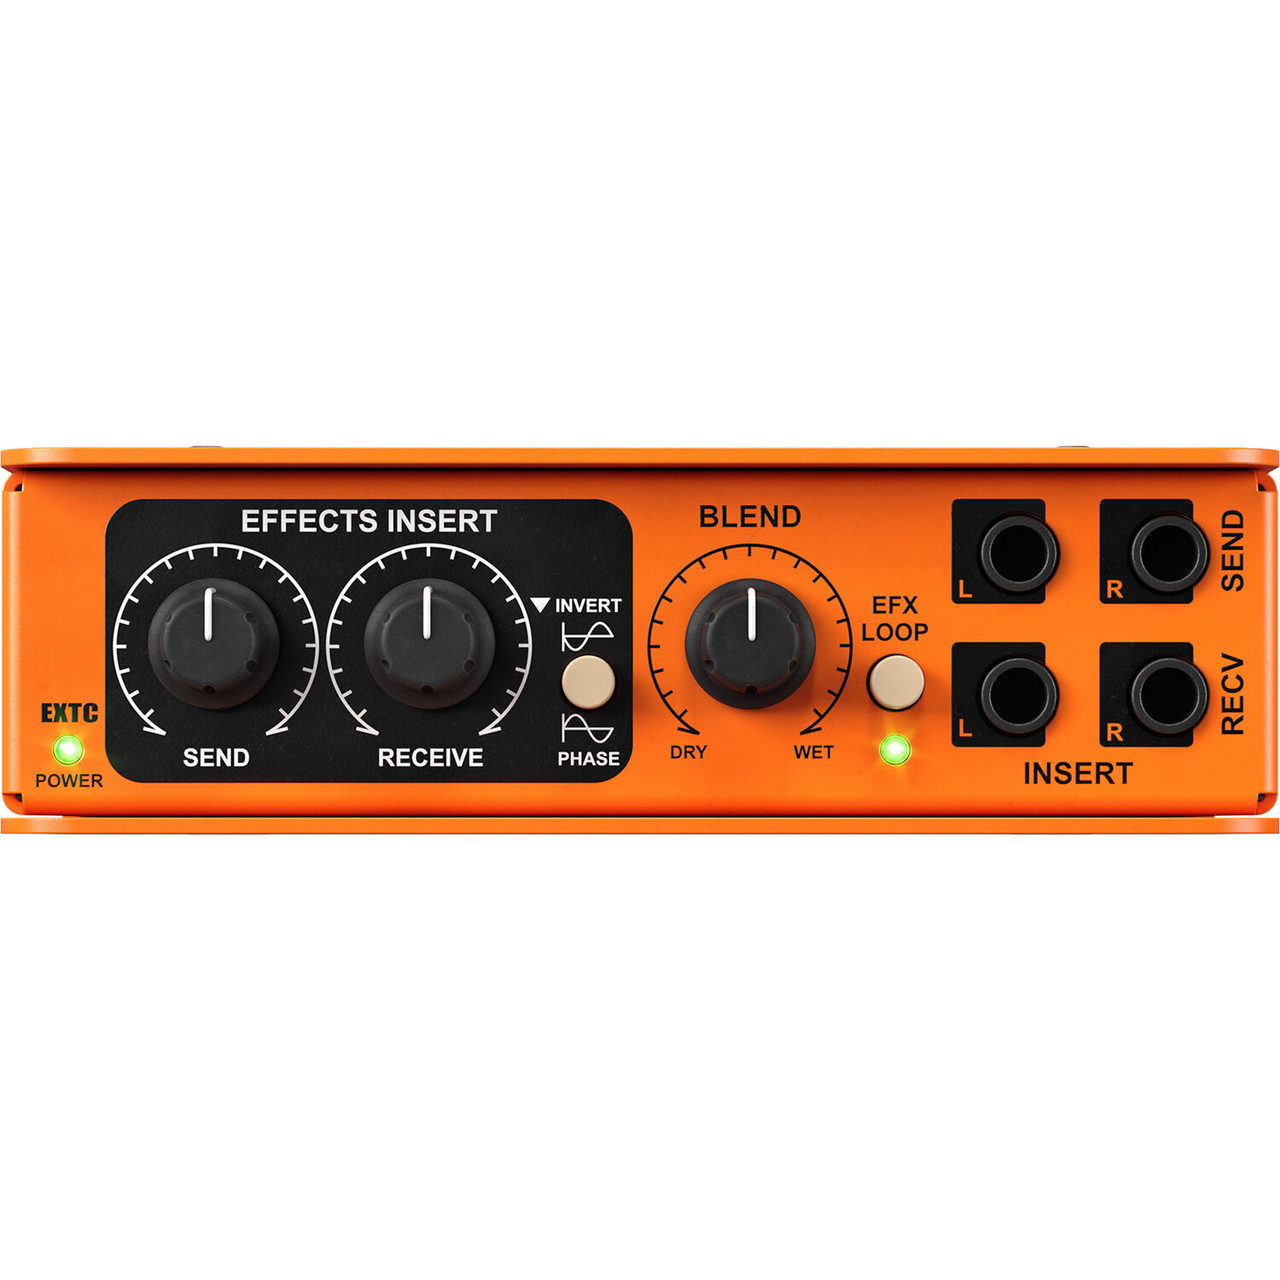 Radial EXTC Stereo Guitar Effects Reamper | FrontEndAudio.com